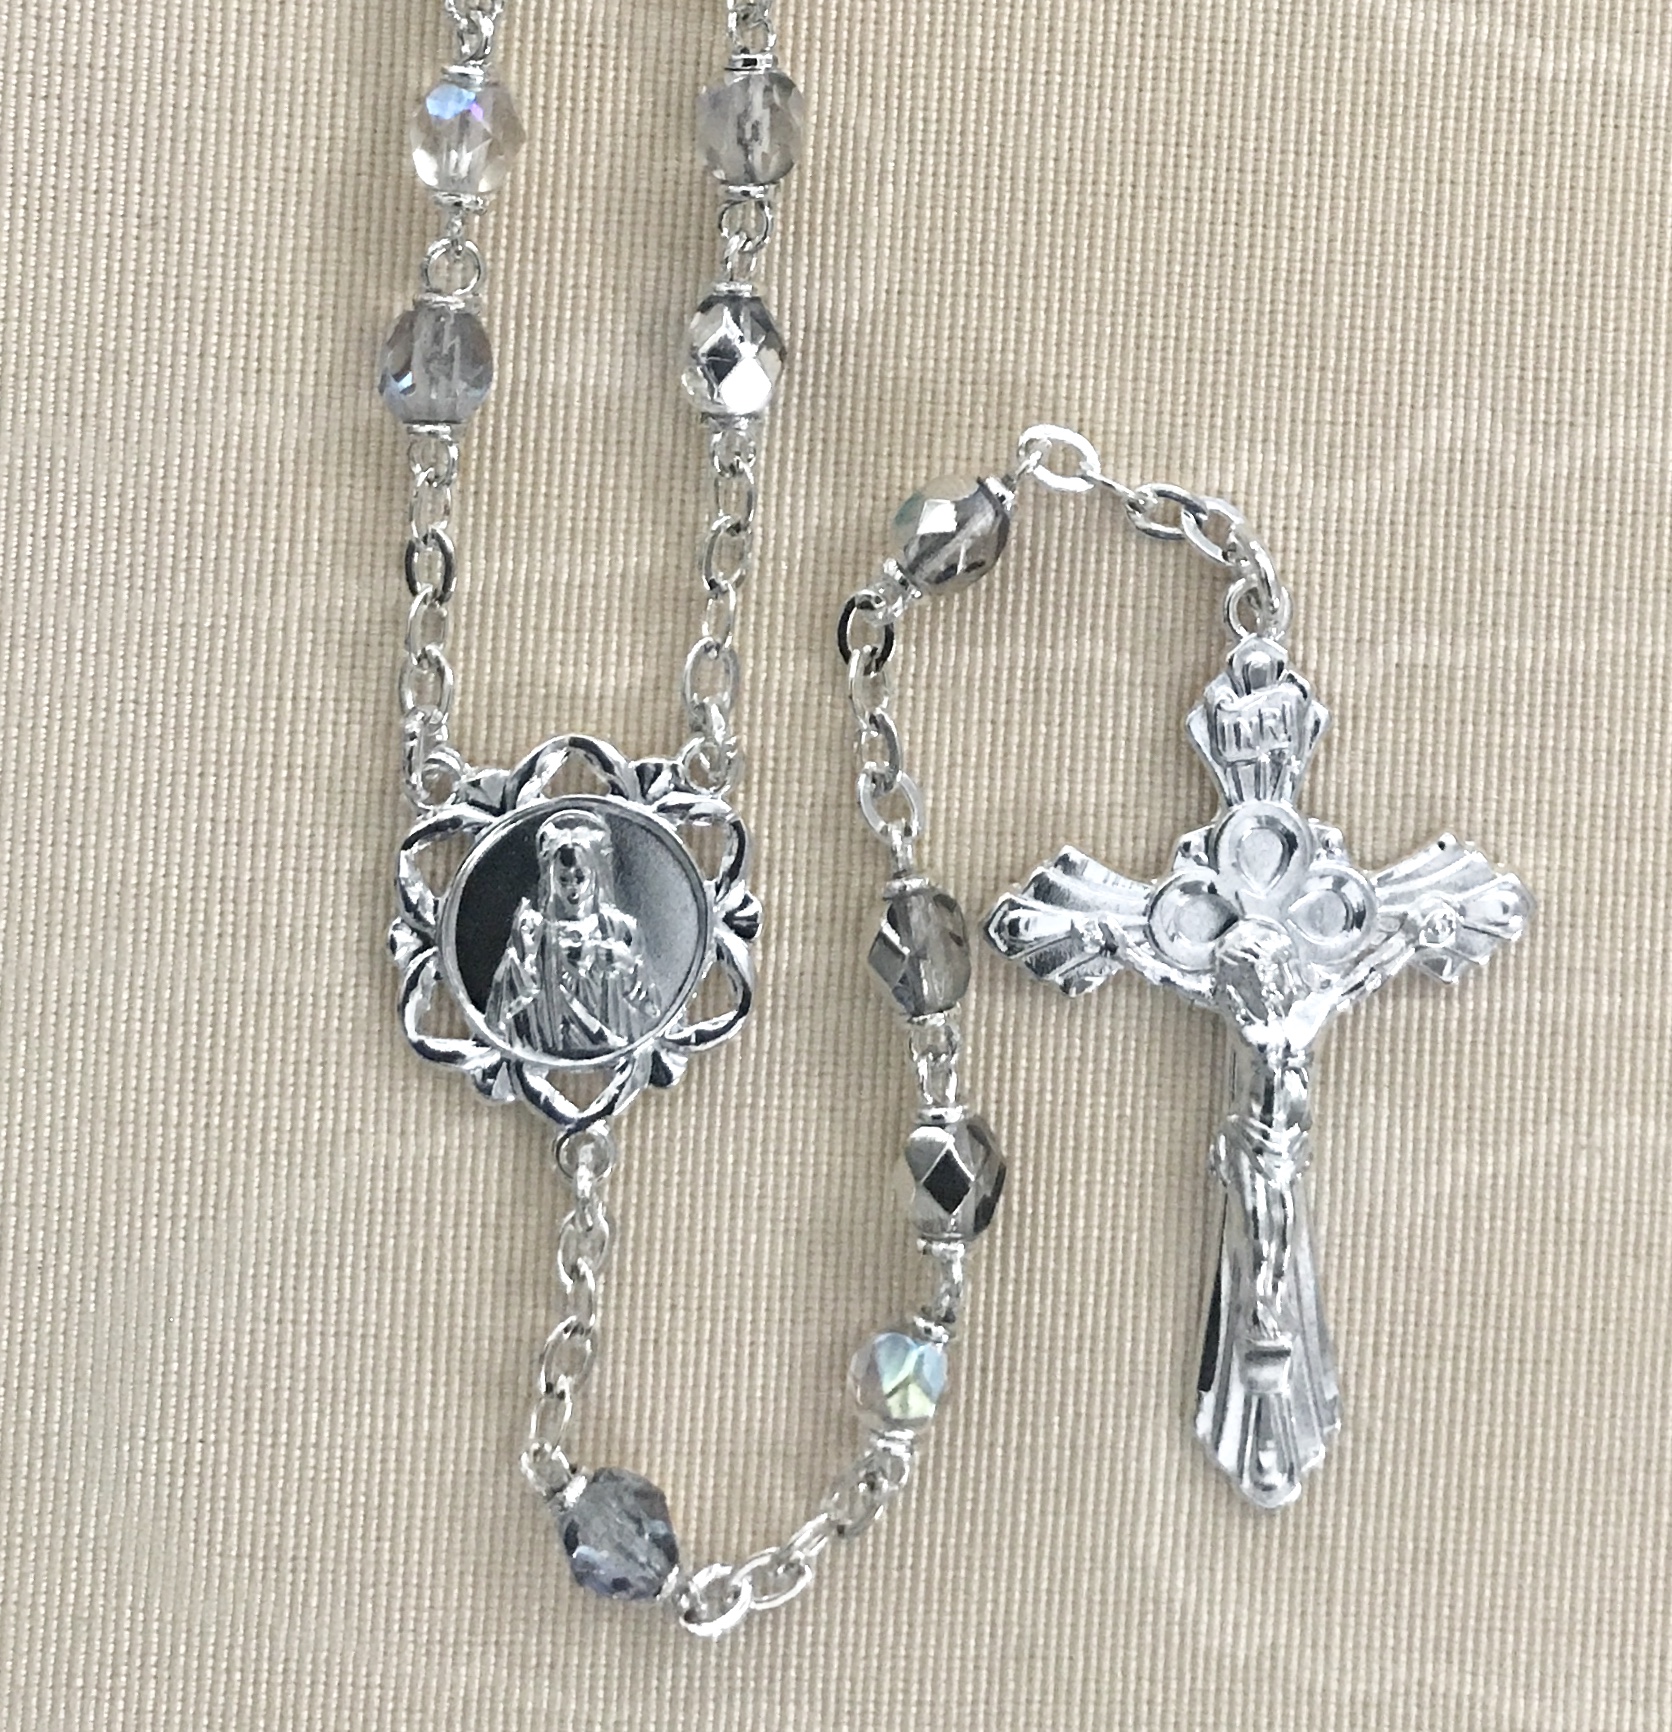 6mm ROUND CRYSTAL AB ROSARY WITH STERLING SILVER PLATED CENTER AND CRUCIFIX GIFT BOXED